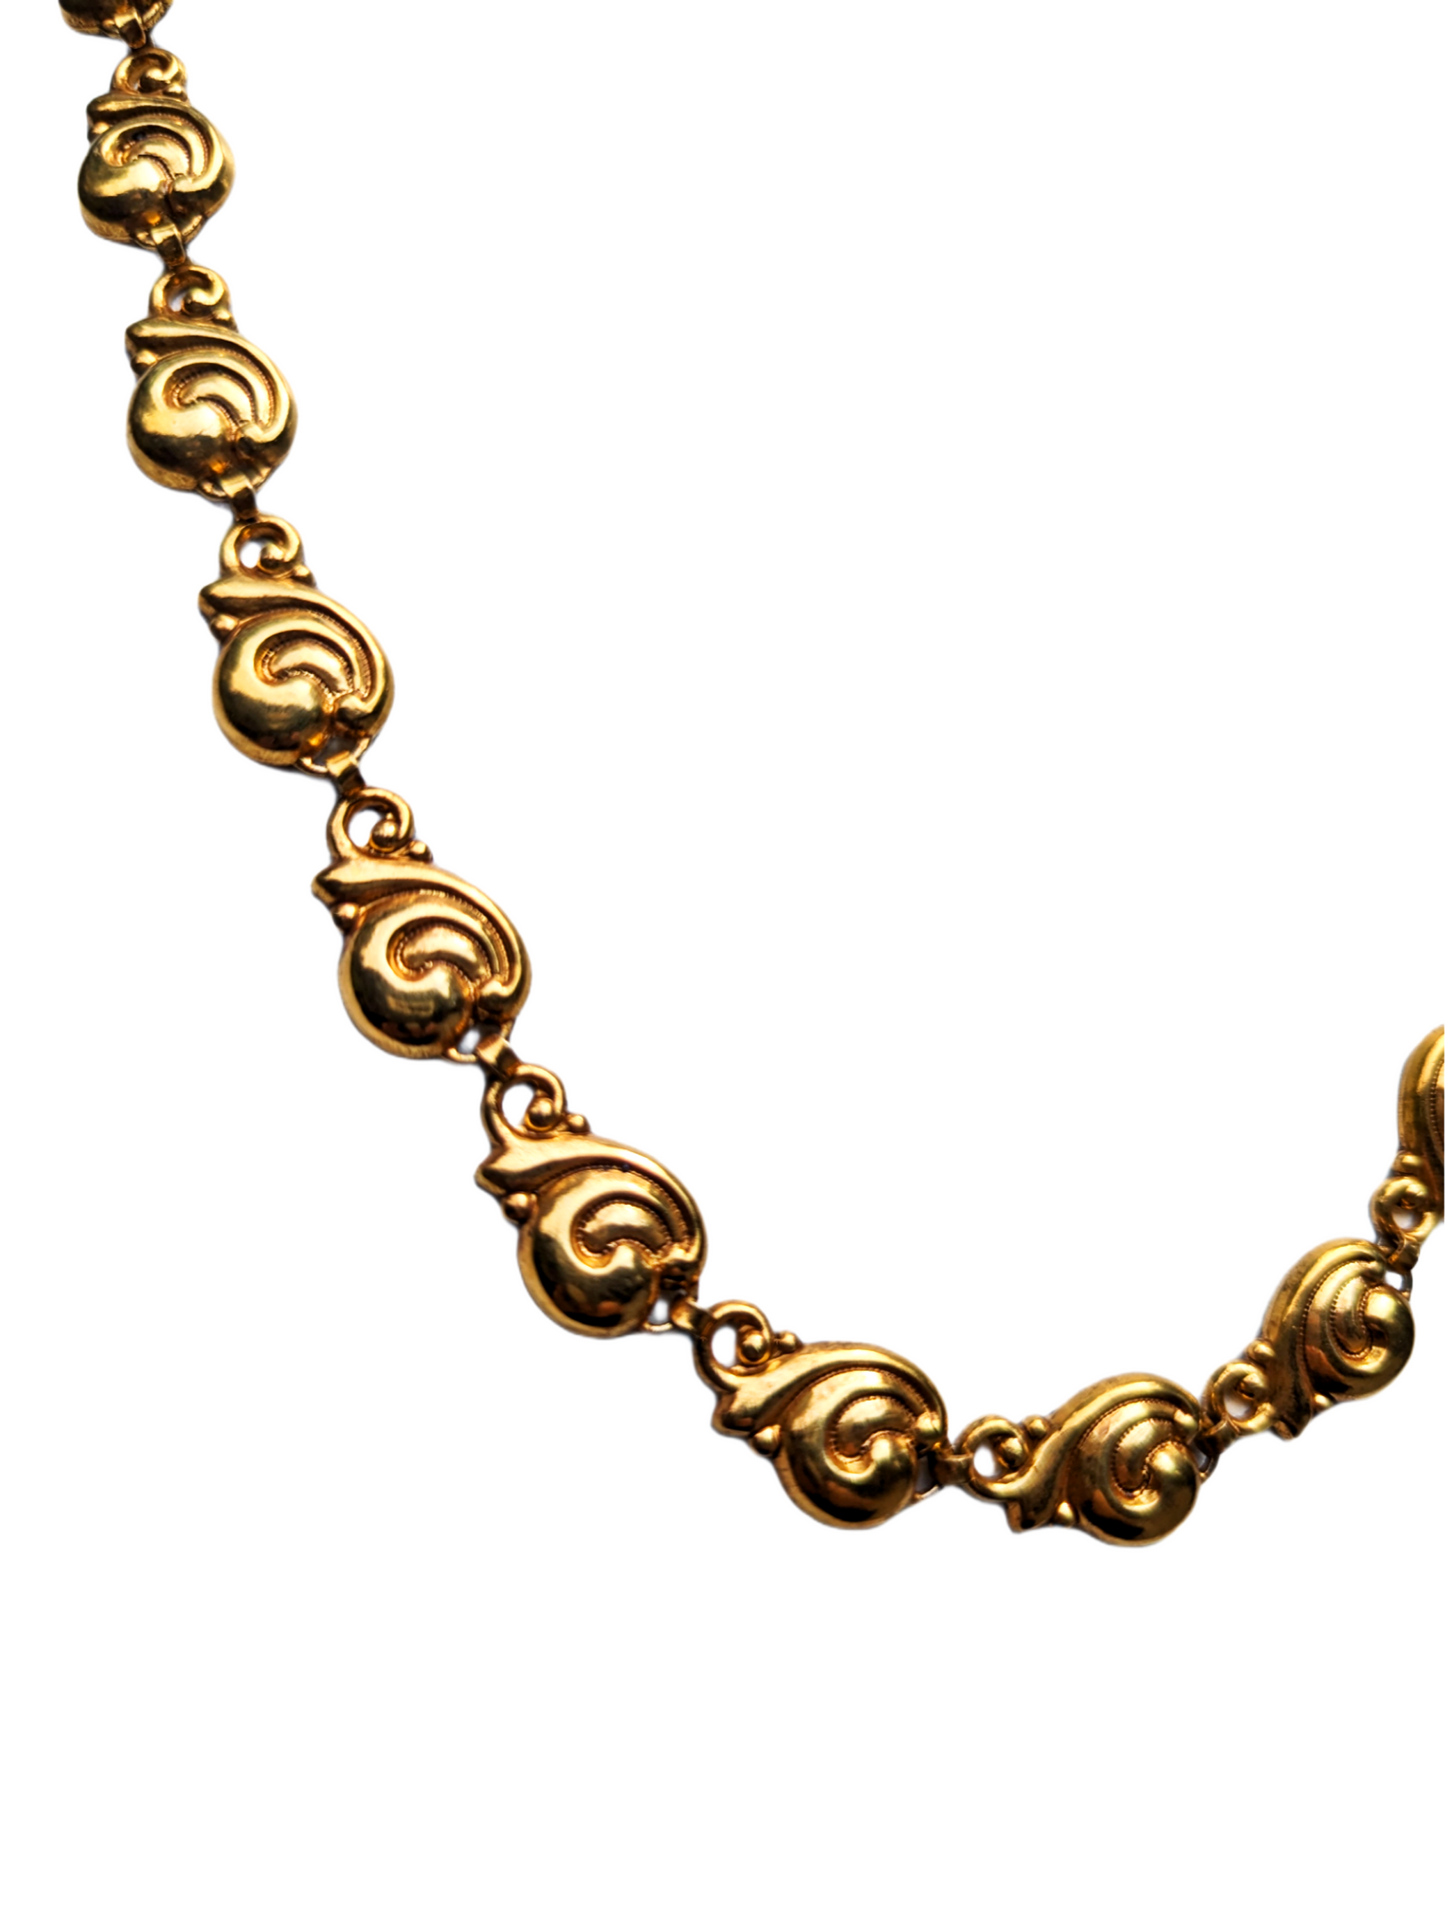 24k Gold Plated NEW OLD STOCK 22-inch Vintage Snail Chain Sugar Gay Isber Miriam Haskell warehouse find